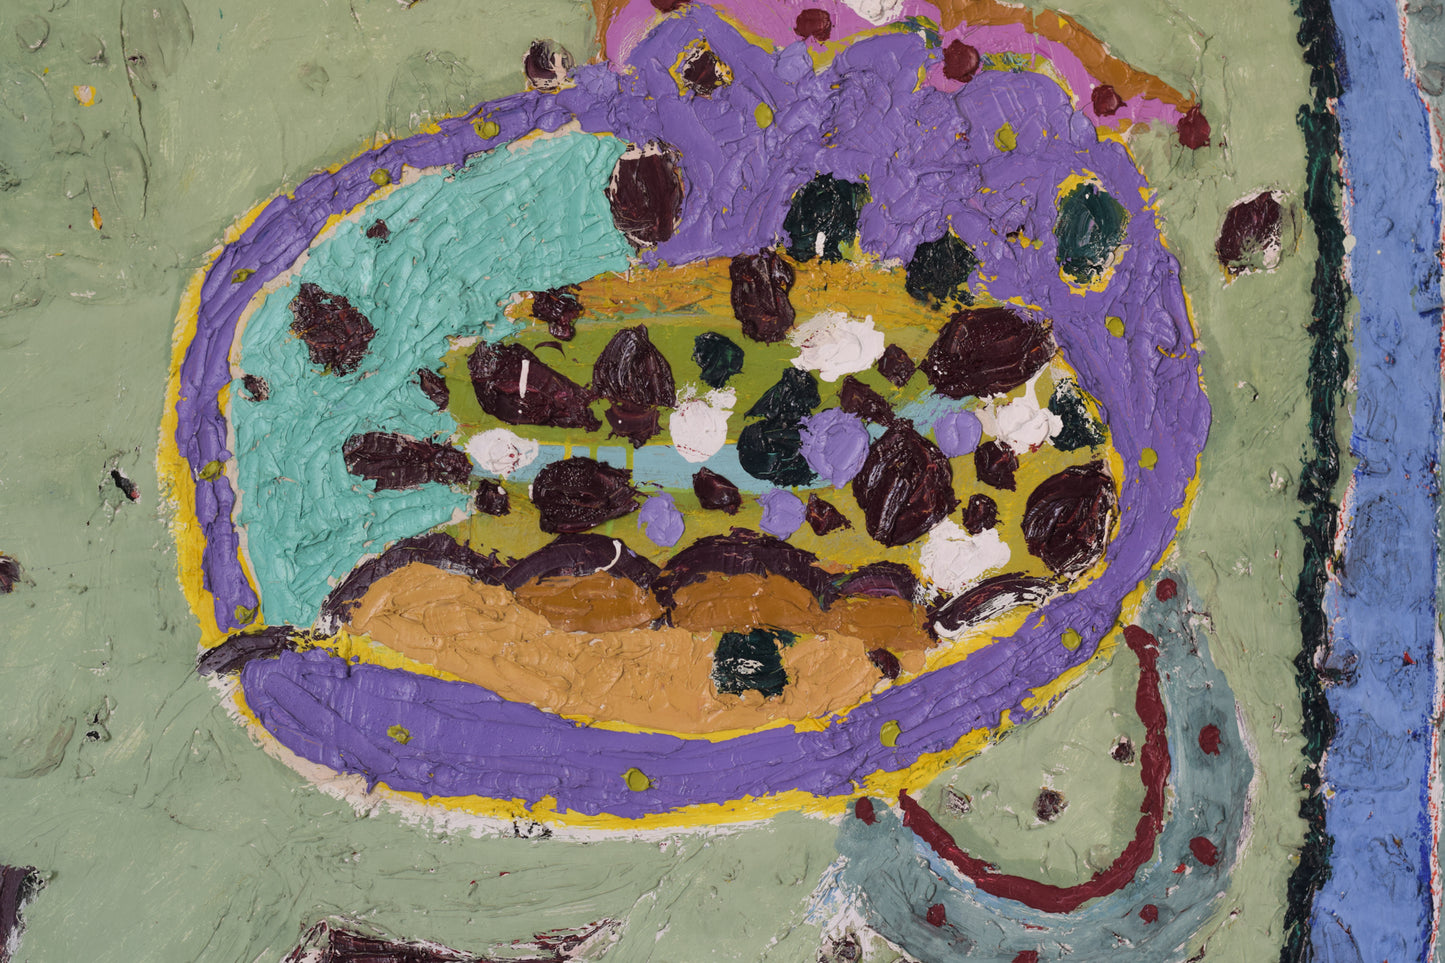 Follower of Gillian Ayres - Abstract Painting in a Modernist Style